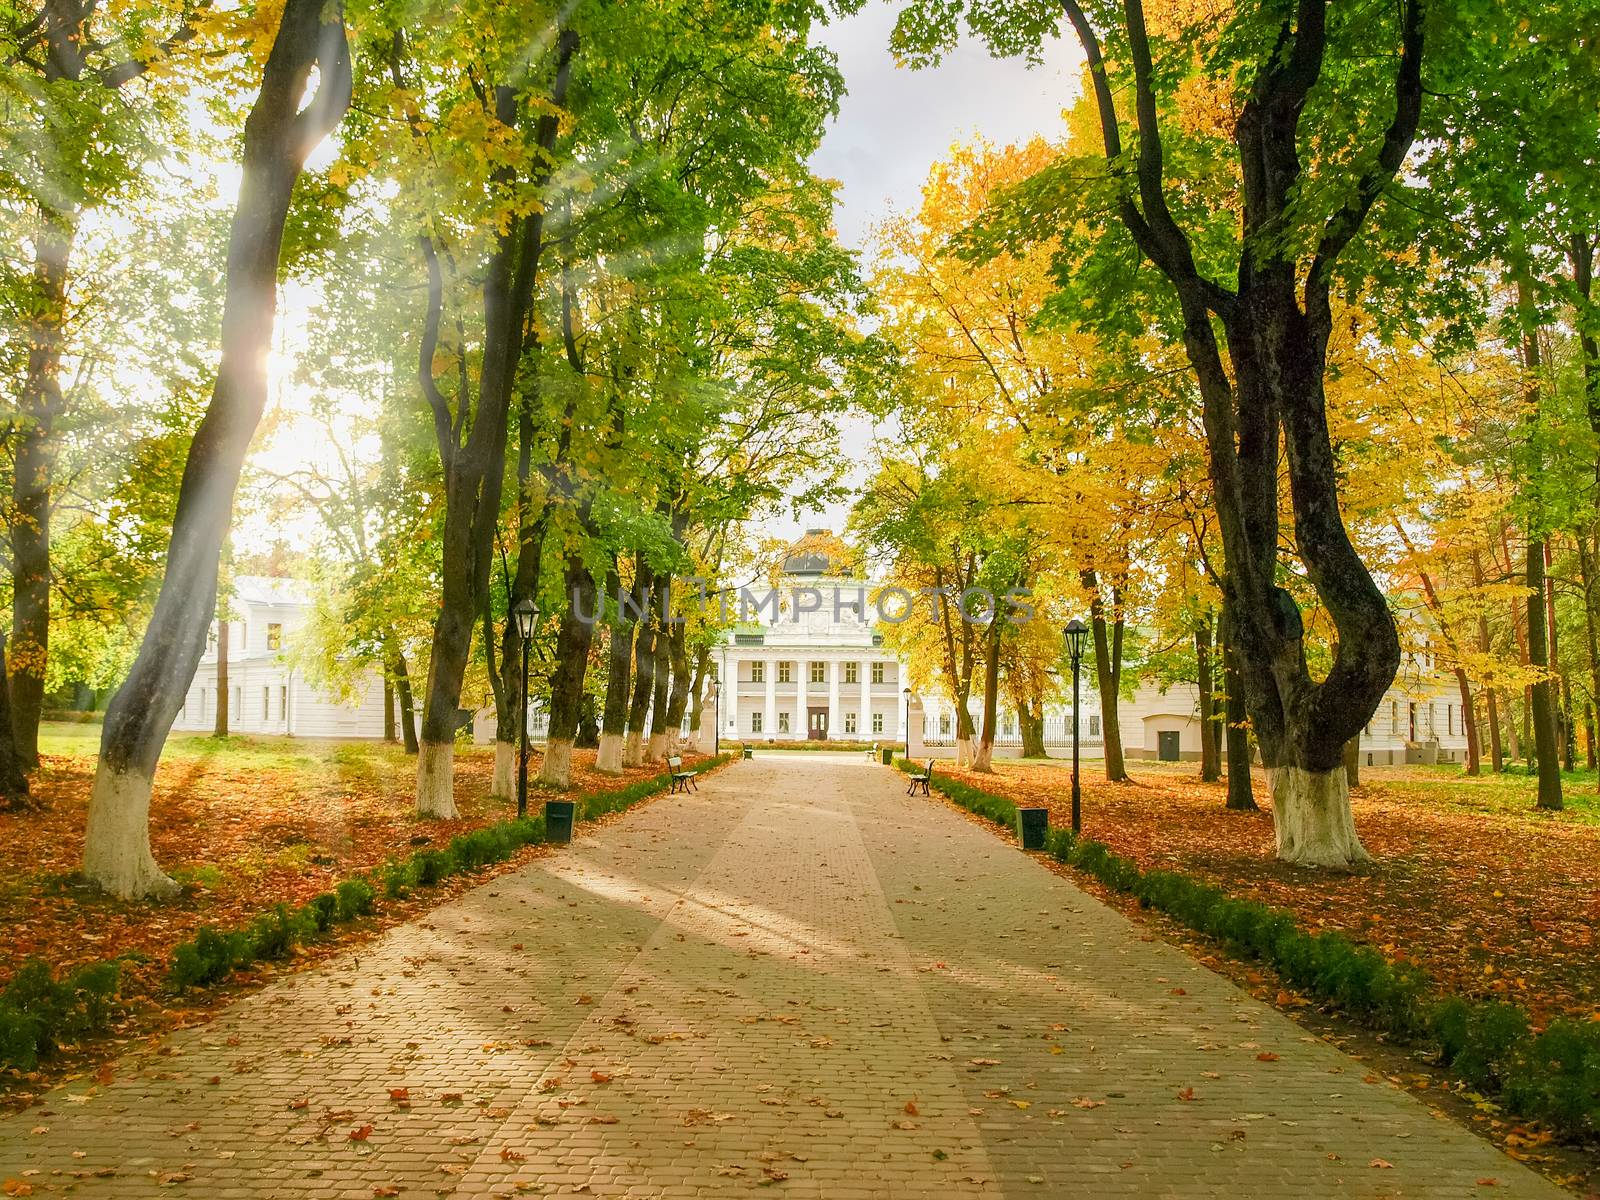 Alley leading to the palace in the autumn park  by anmbph